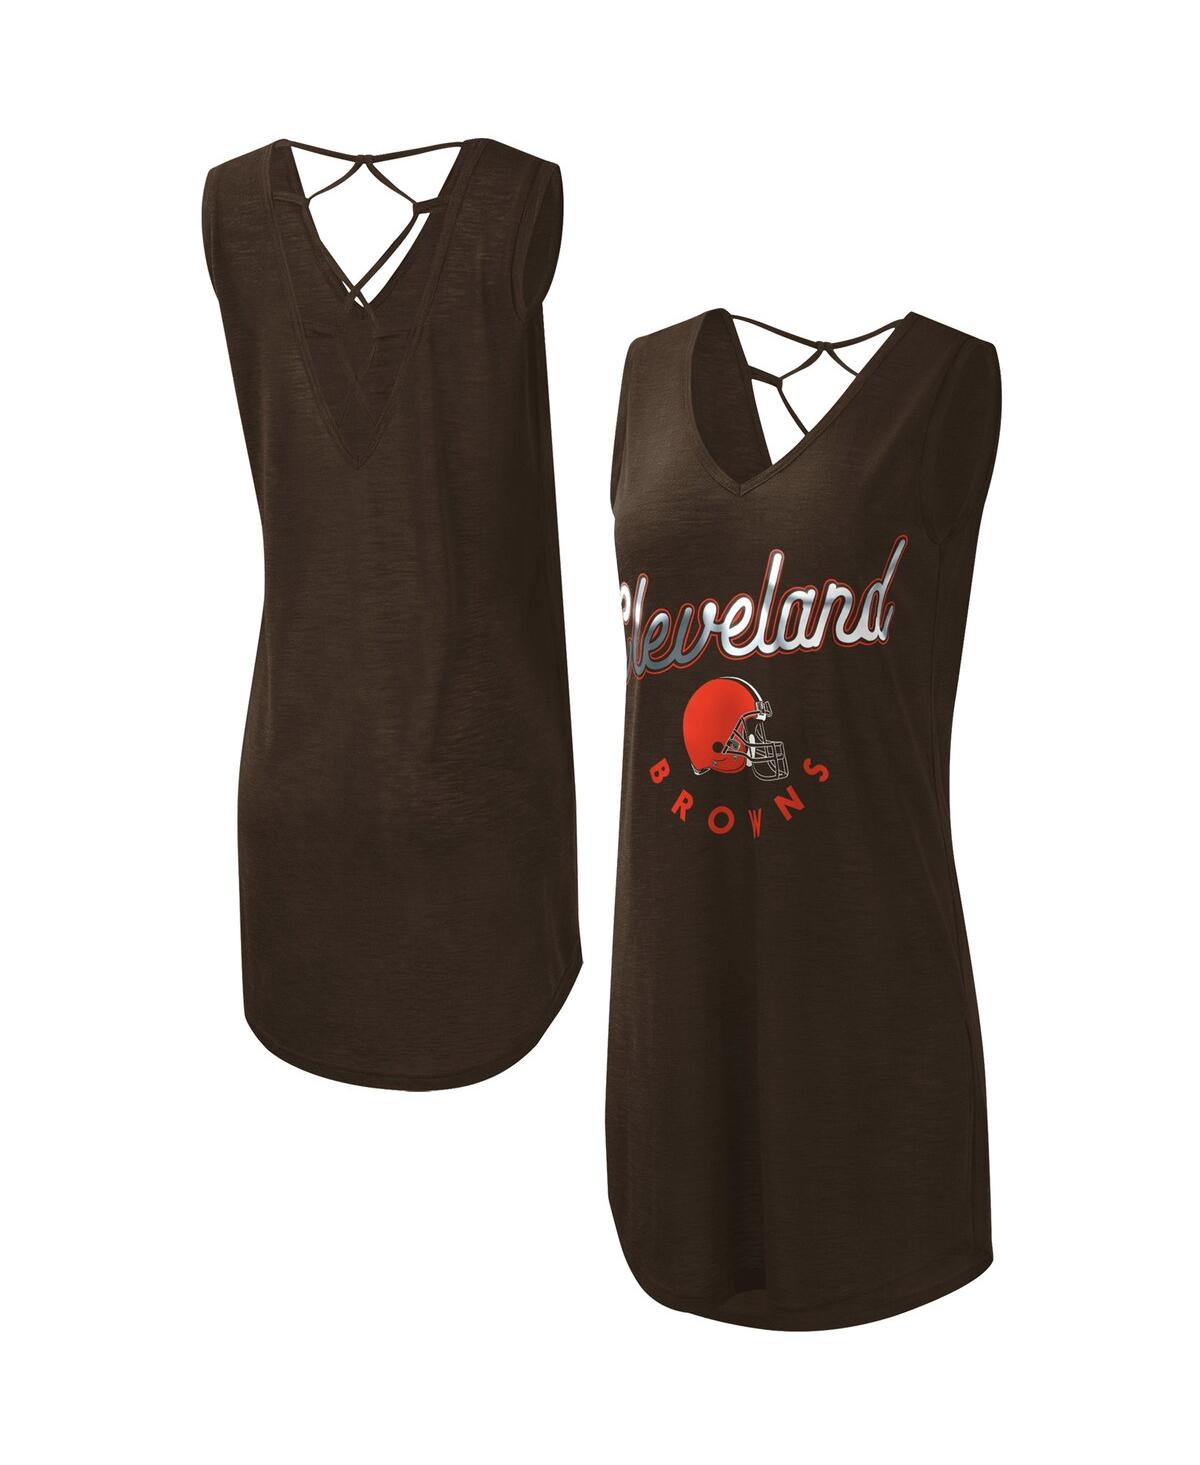 G-III 4HER BY CARL BANKS WOMEN'S G-III 4HER BY CARL BANKS BROWN CLEVELAND BROWNS GAME TIME SWIM V-NECK COVER-UP DRESS